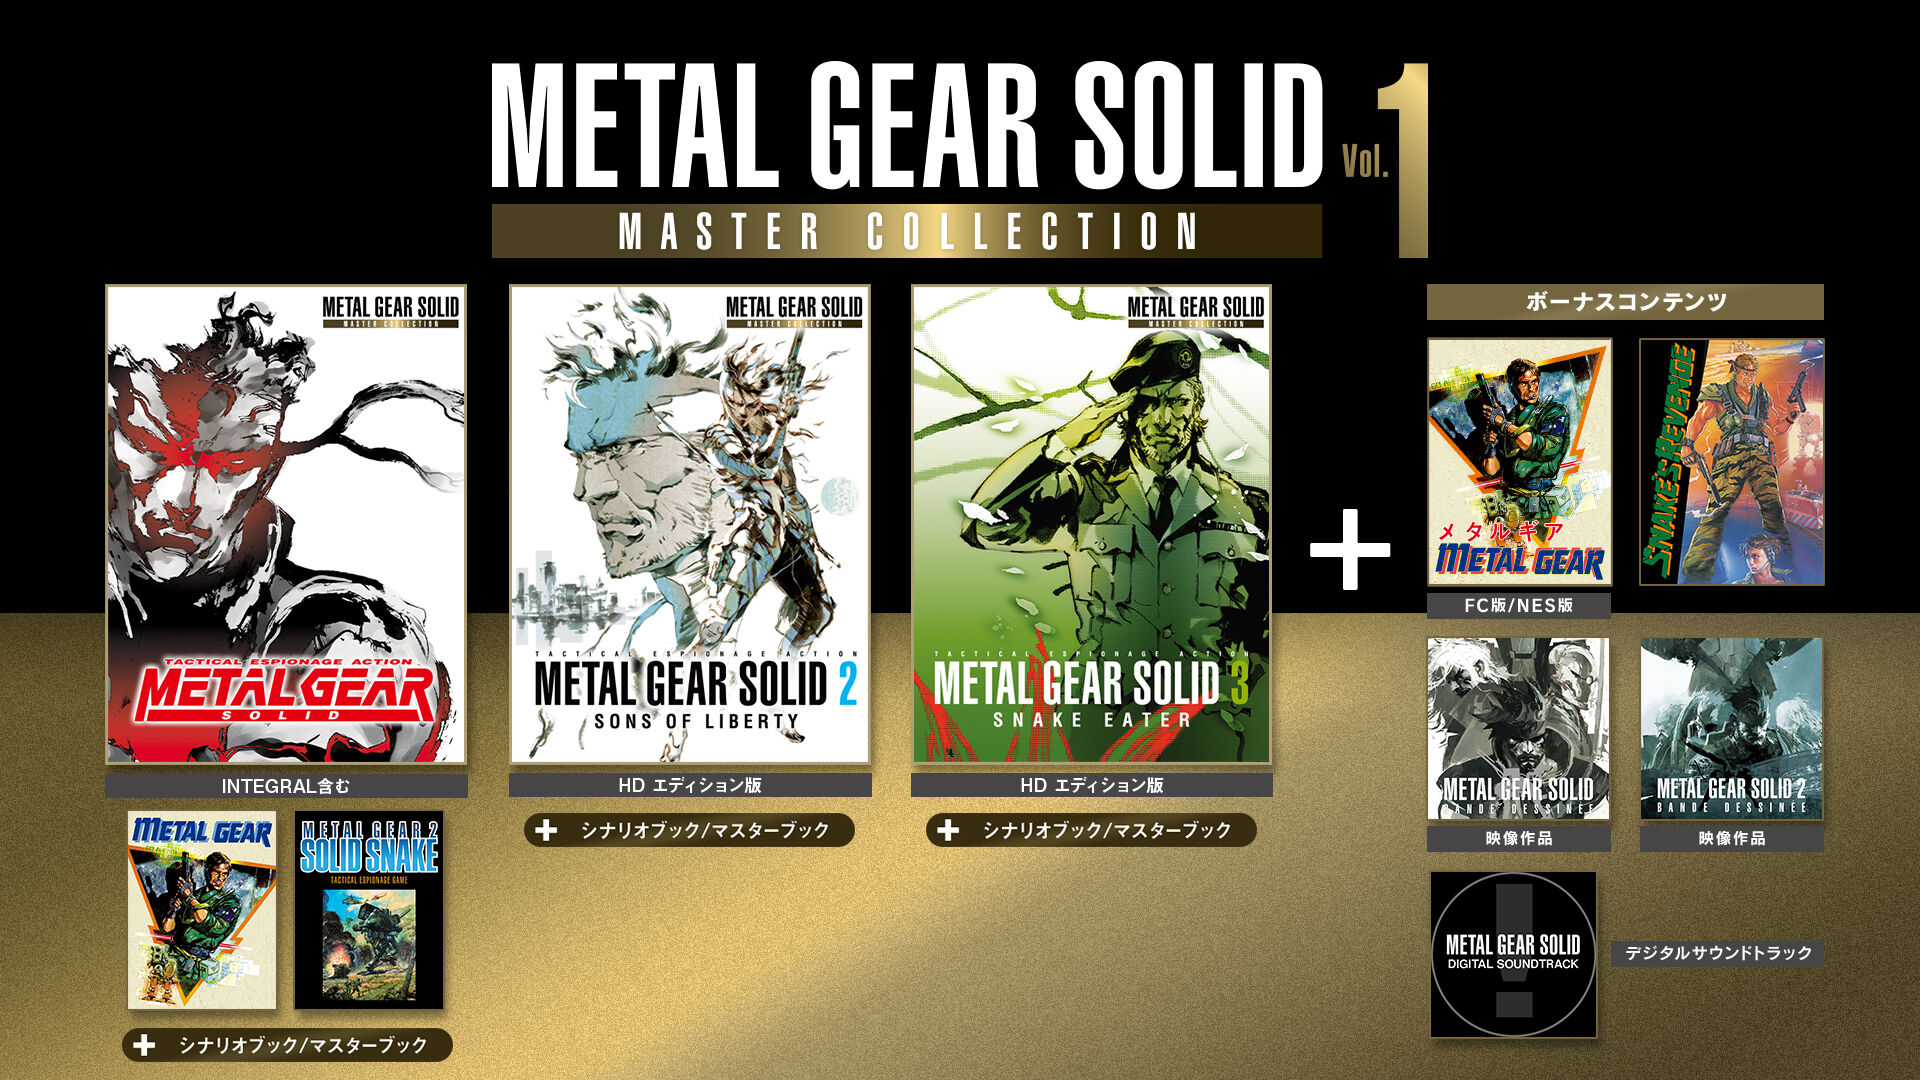 METAL GEAR SOLID: MASTER COLLECTION Vol.1 | My Nintendo Store ...